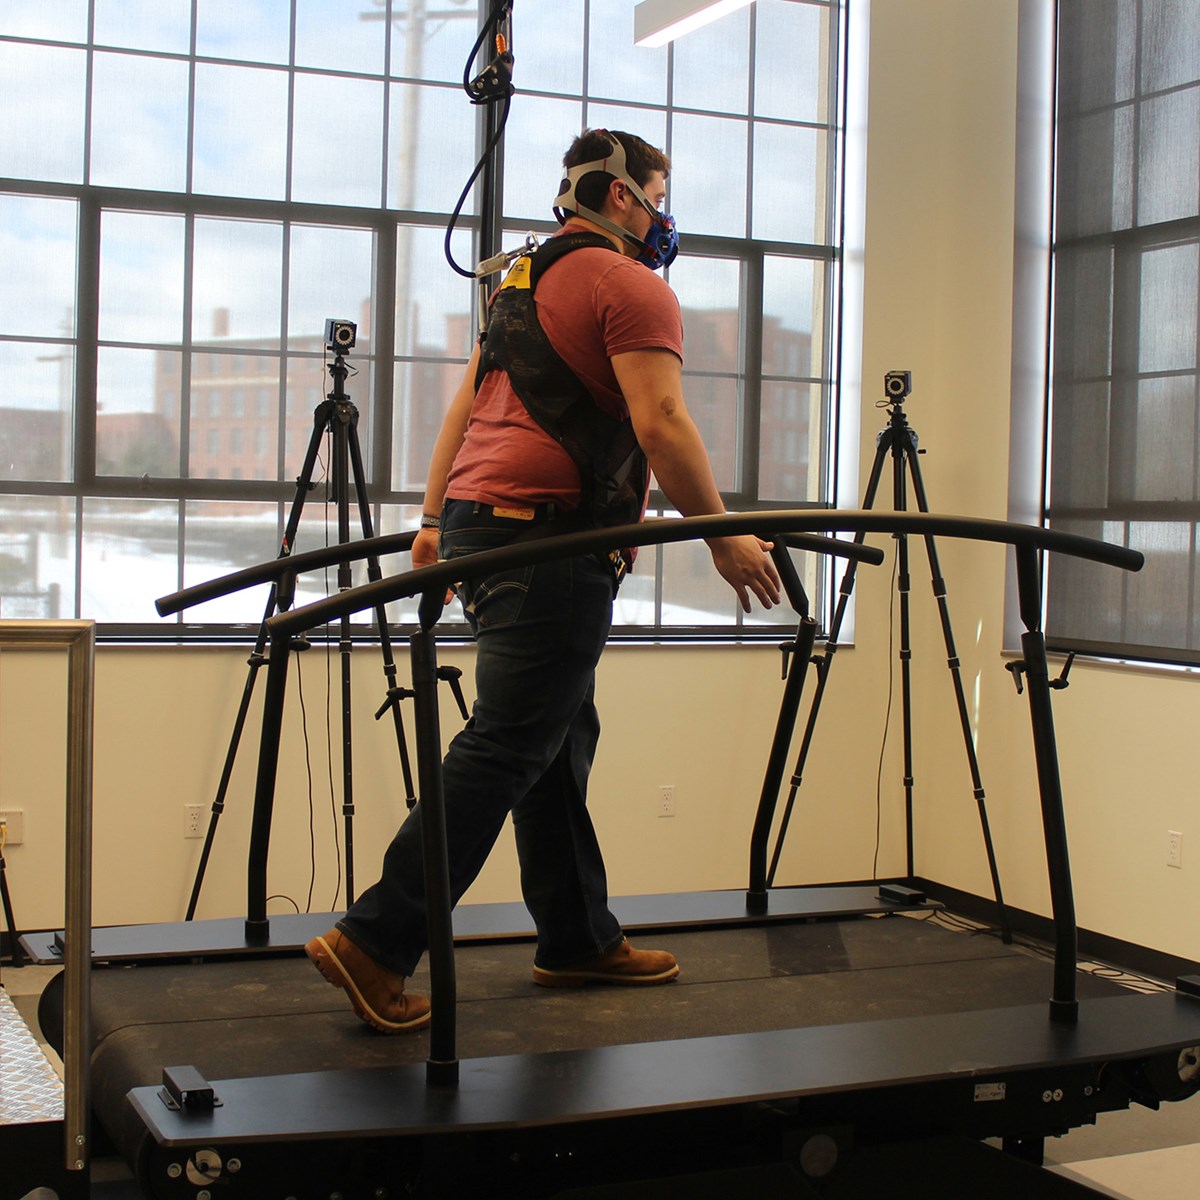 A person wearing a portable VO2 measurement device walking on an instrumented treadmill with motion capture cameras.